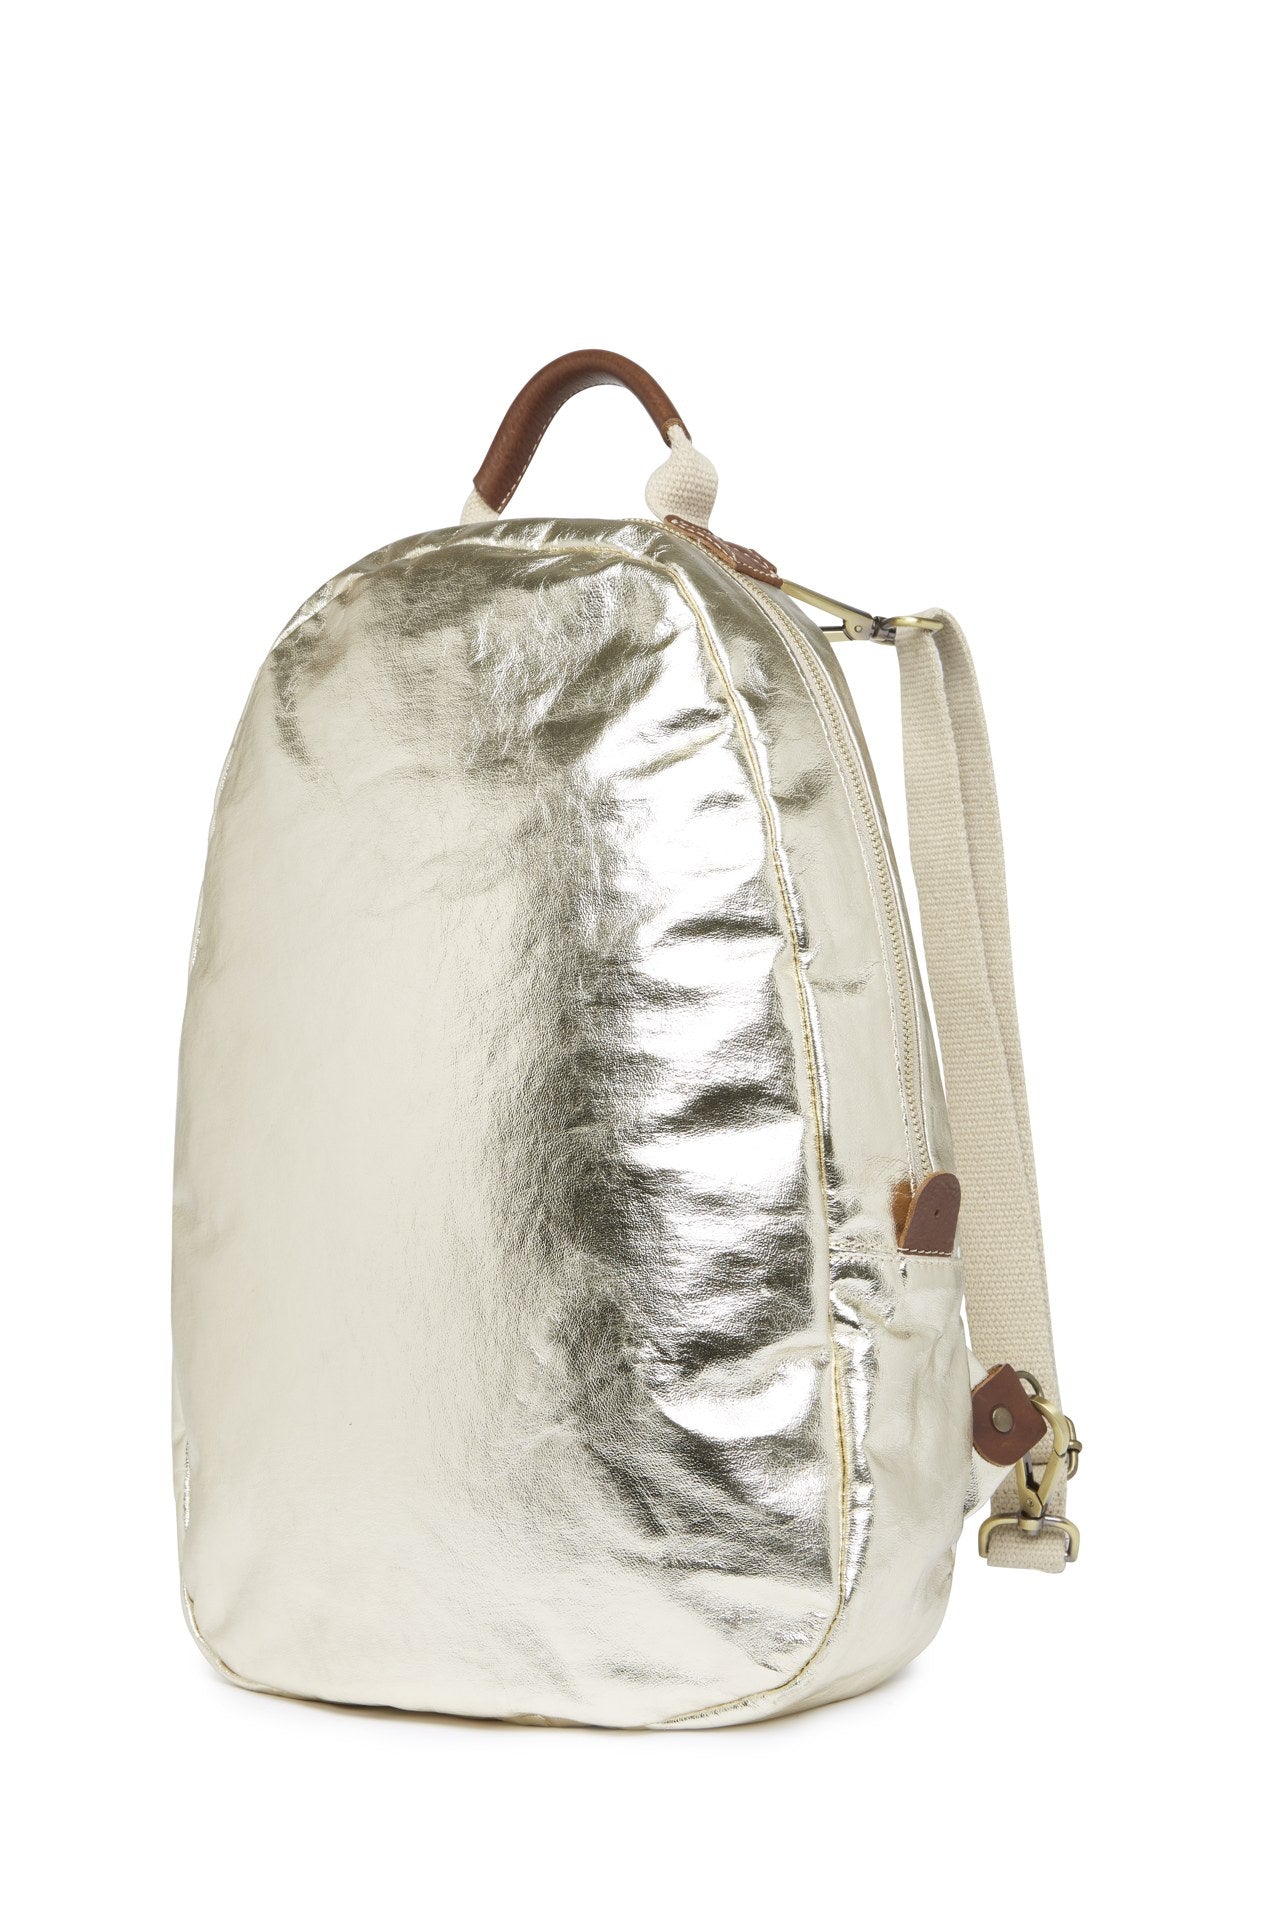 An oval washable paper backpack is shown from a 3/4 angle. It has a top handle, two adjustable canvas shoulder straps, and is metallic gold in colour.